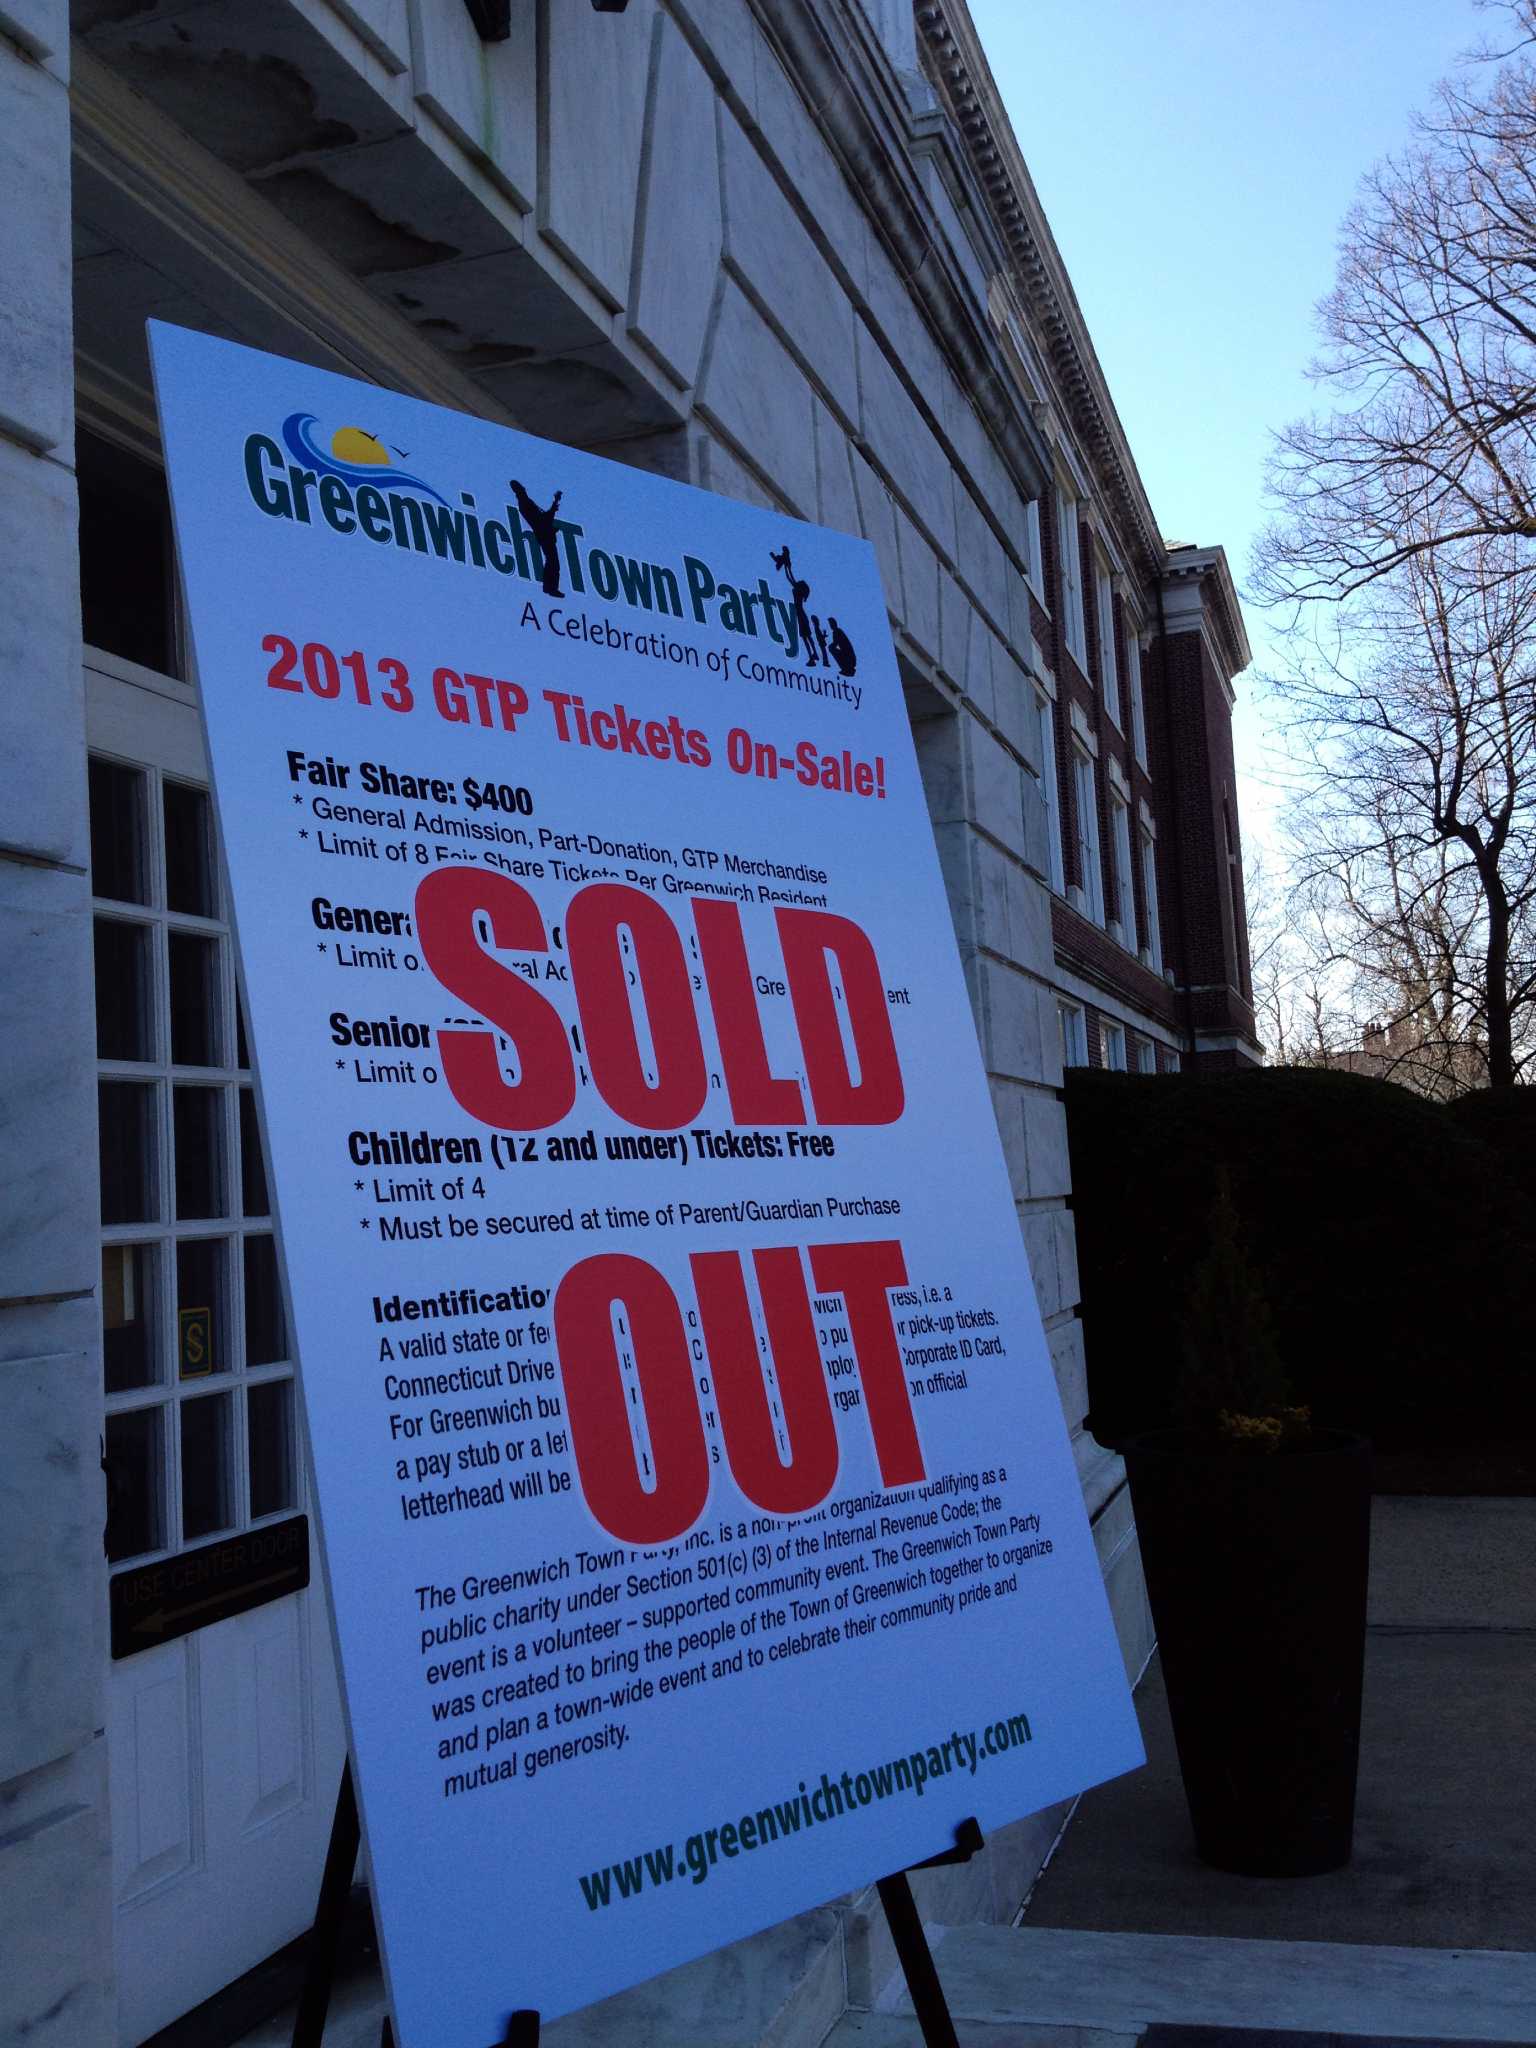 Greenwich Town Party tickets sell out in minutes